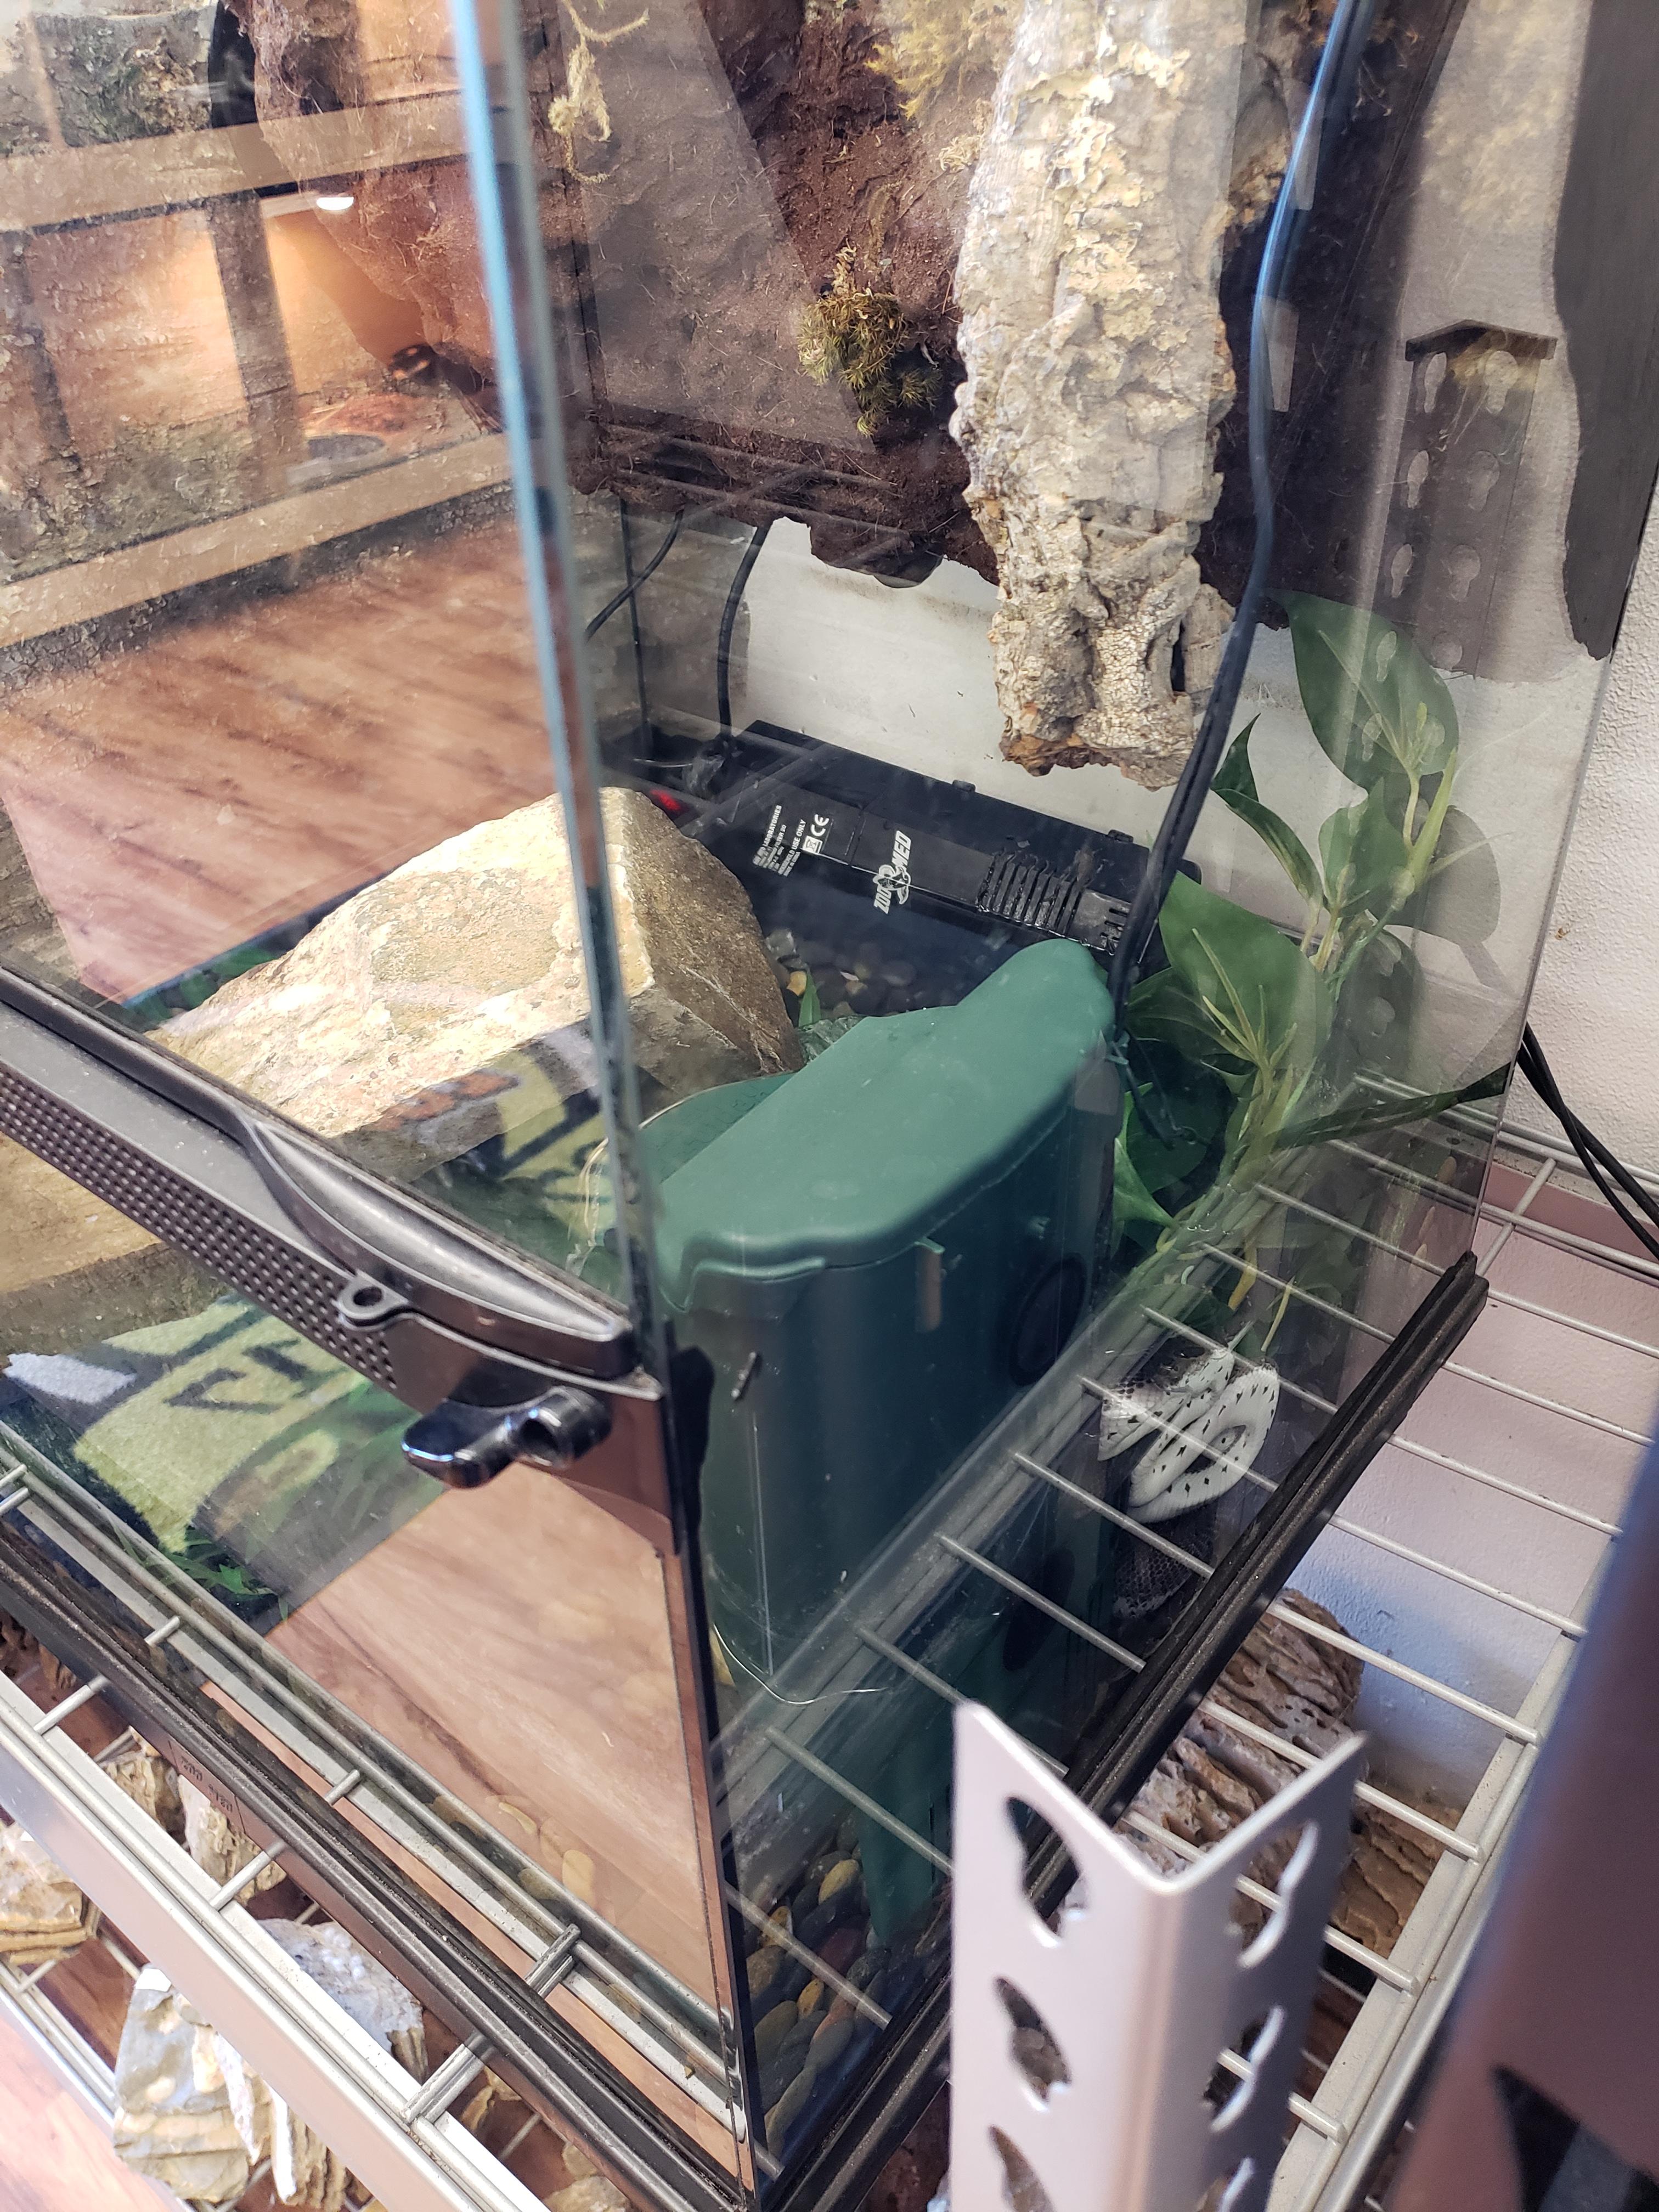 A Visit to The Reptile Factory